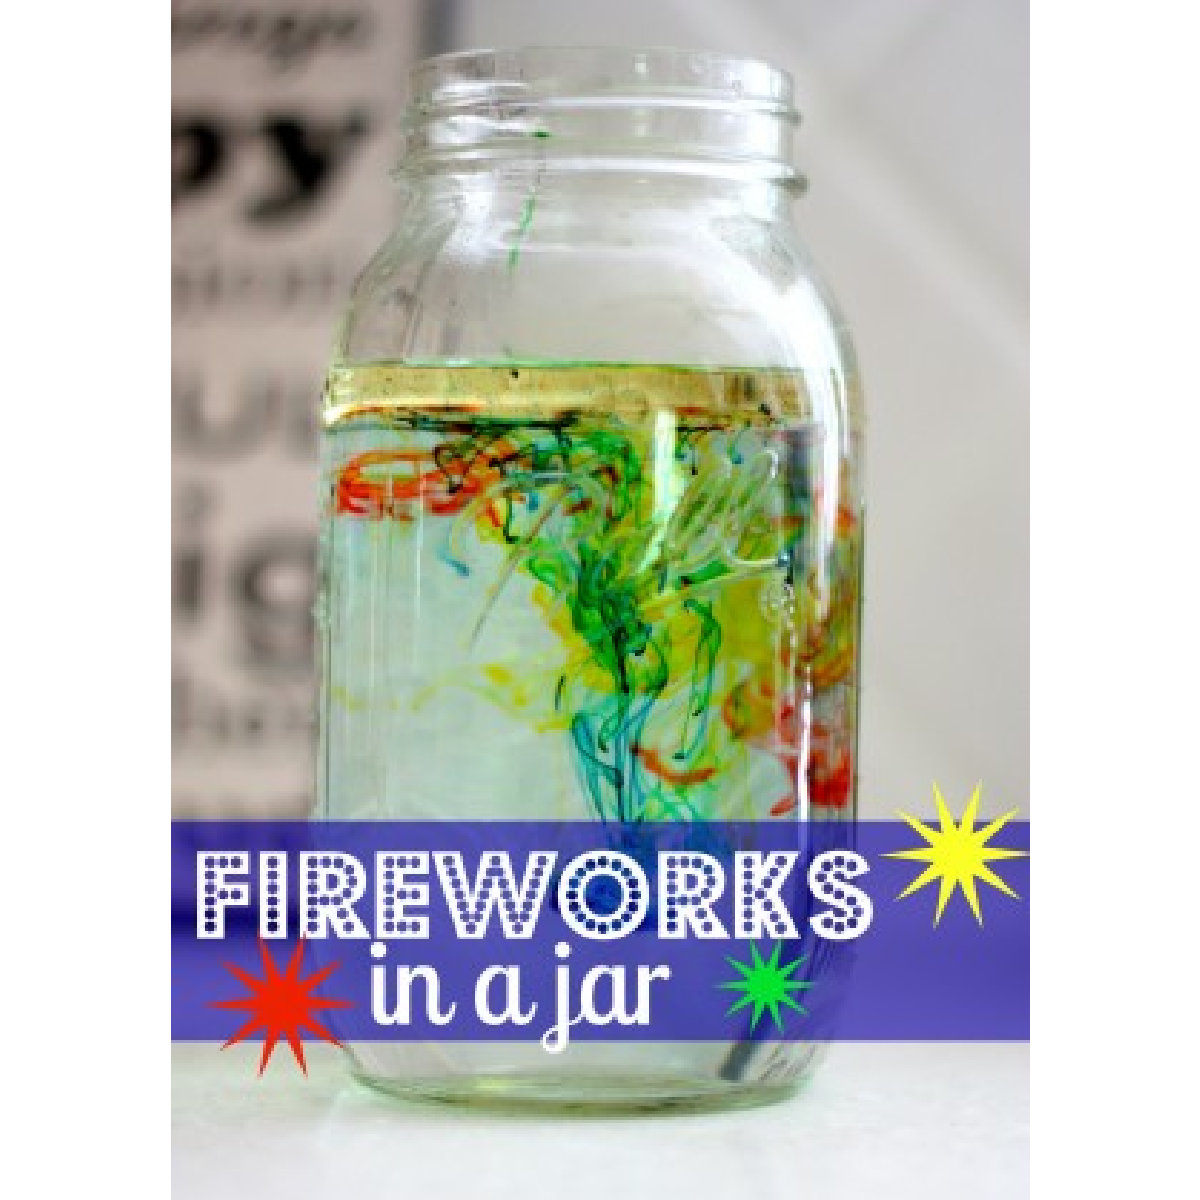 New Years activities- fireworks in a jar with colors- kids activities blog